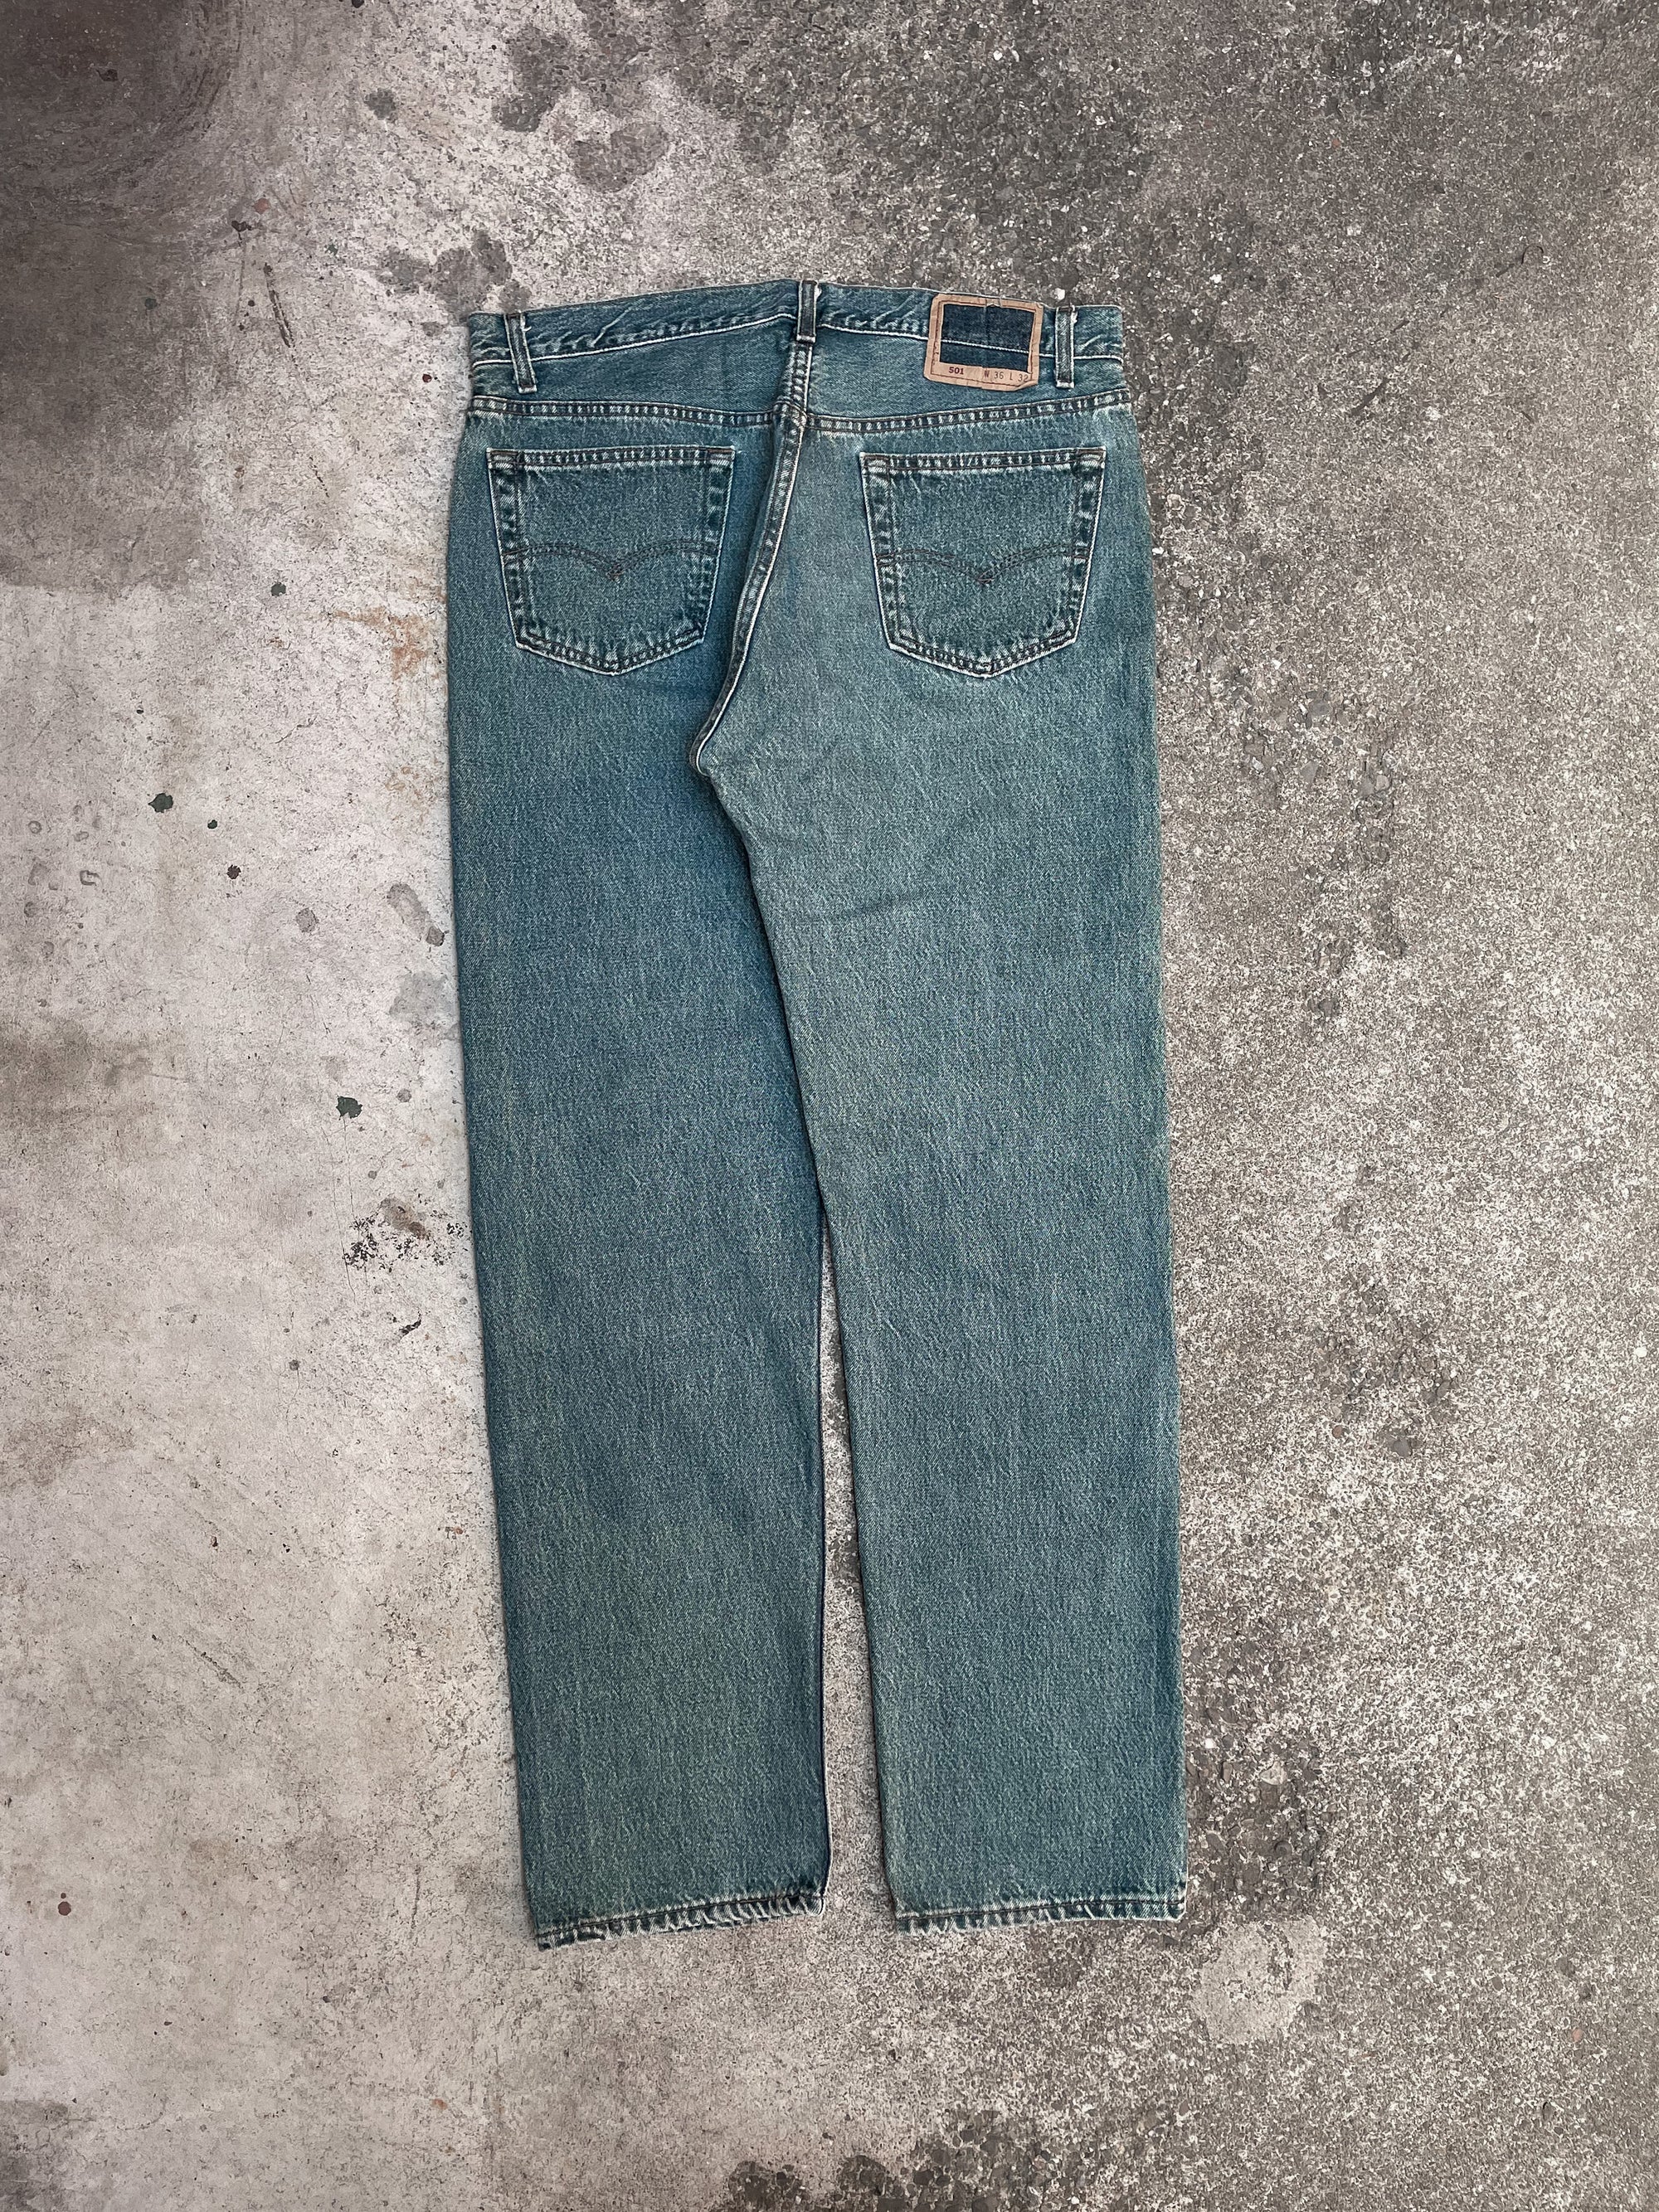 1990s Levi’s Faded Blue Green 501 (35X31)